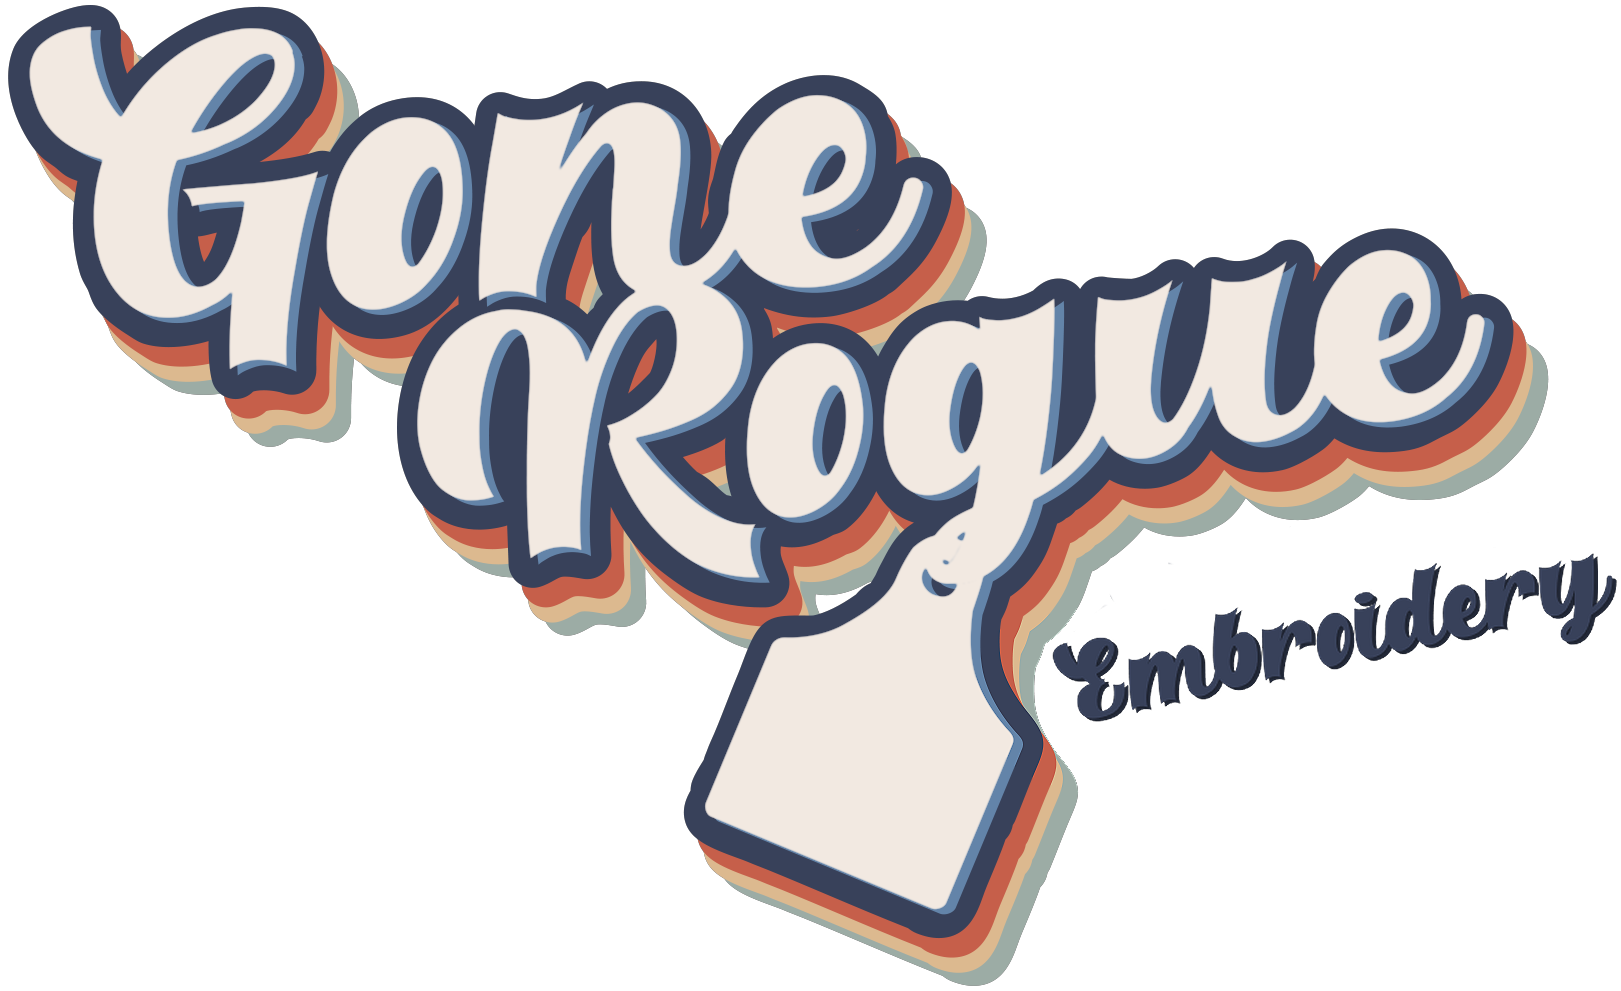 Gone Rogue Embroidery